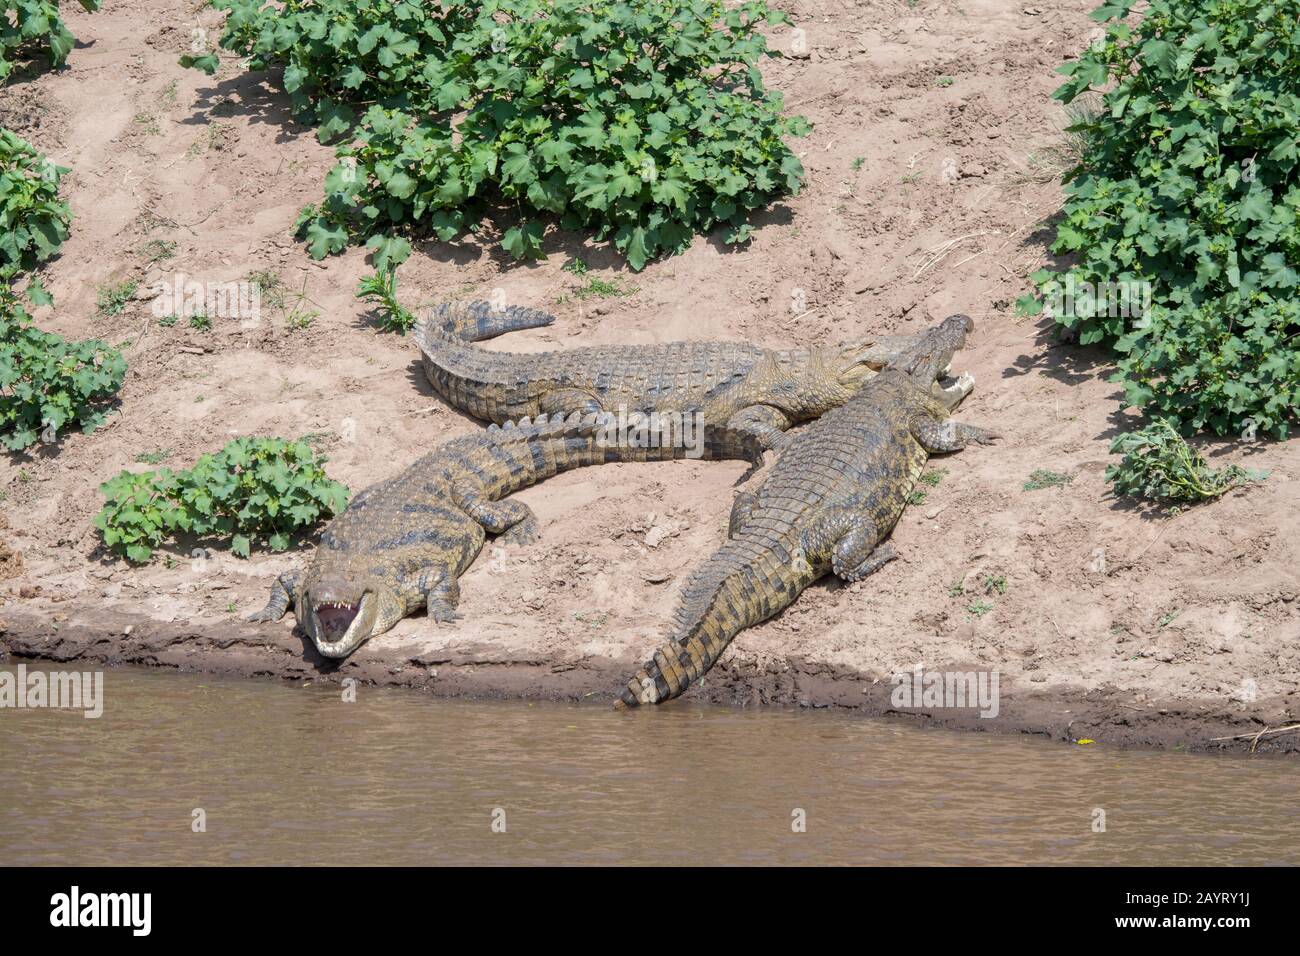 Nile crocodiles (Crocodylus niloticus) sunning themselves on the river bank of the Mara River in the Masai Mara National Reserve in Kenya. Stock Photo